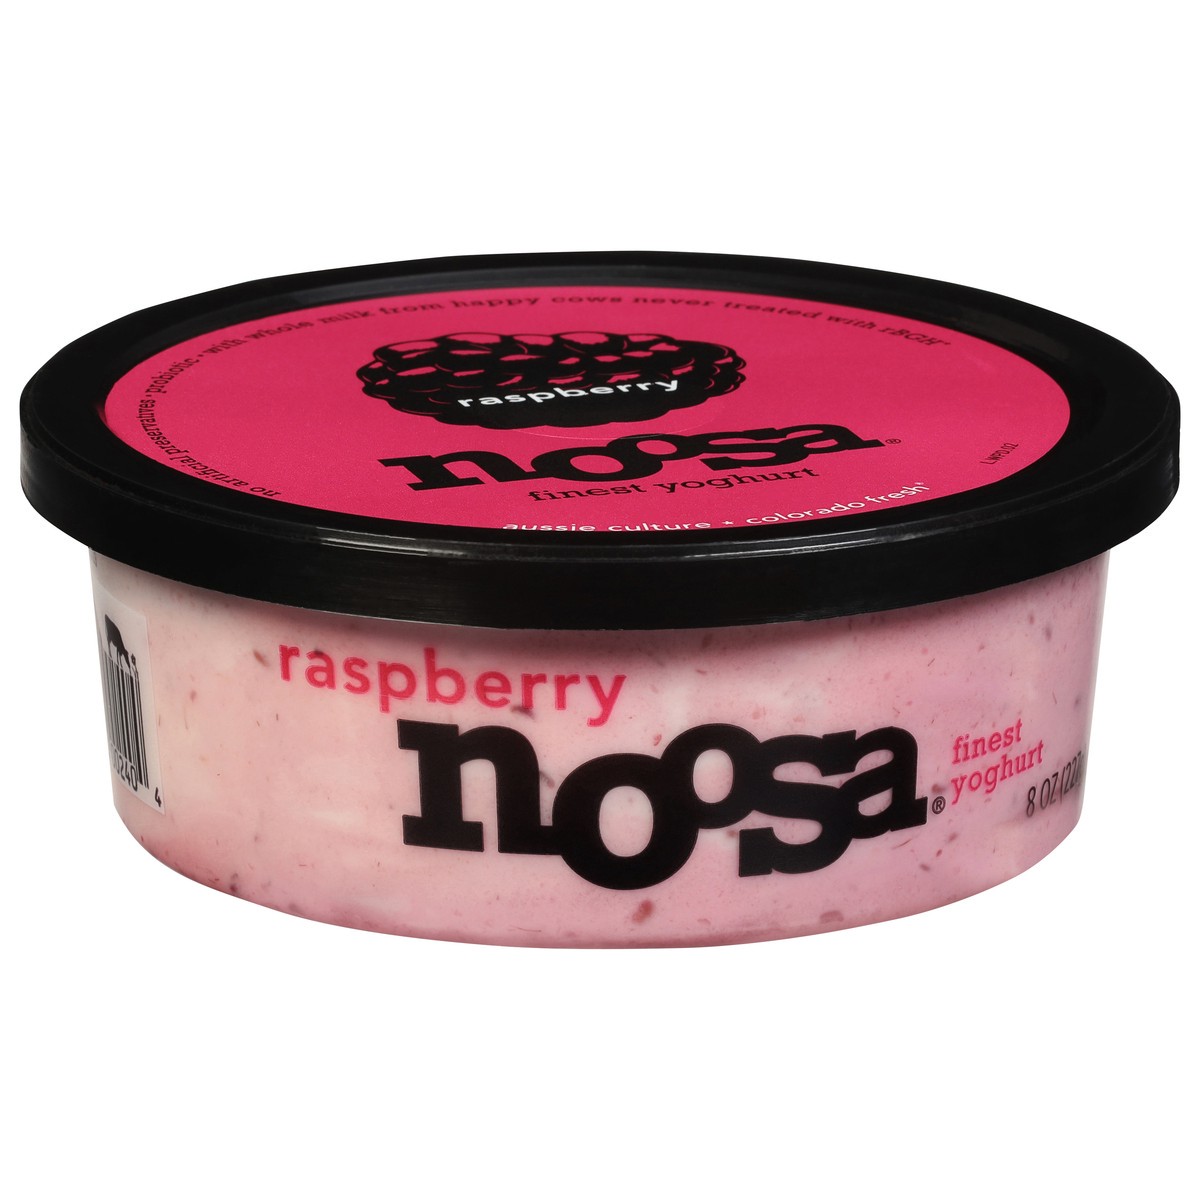 slide 9 of 9, noosa Yoghurt, Raspberry, 8 oz, Whole Milk Yogurt, Grade-A Pasteurized, Gluten Free, Probiotic, Made With the Finest Quality Ingredients, 8 oz